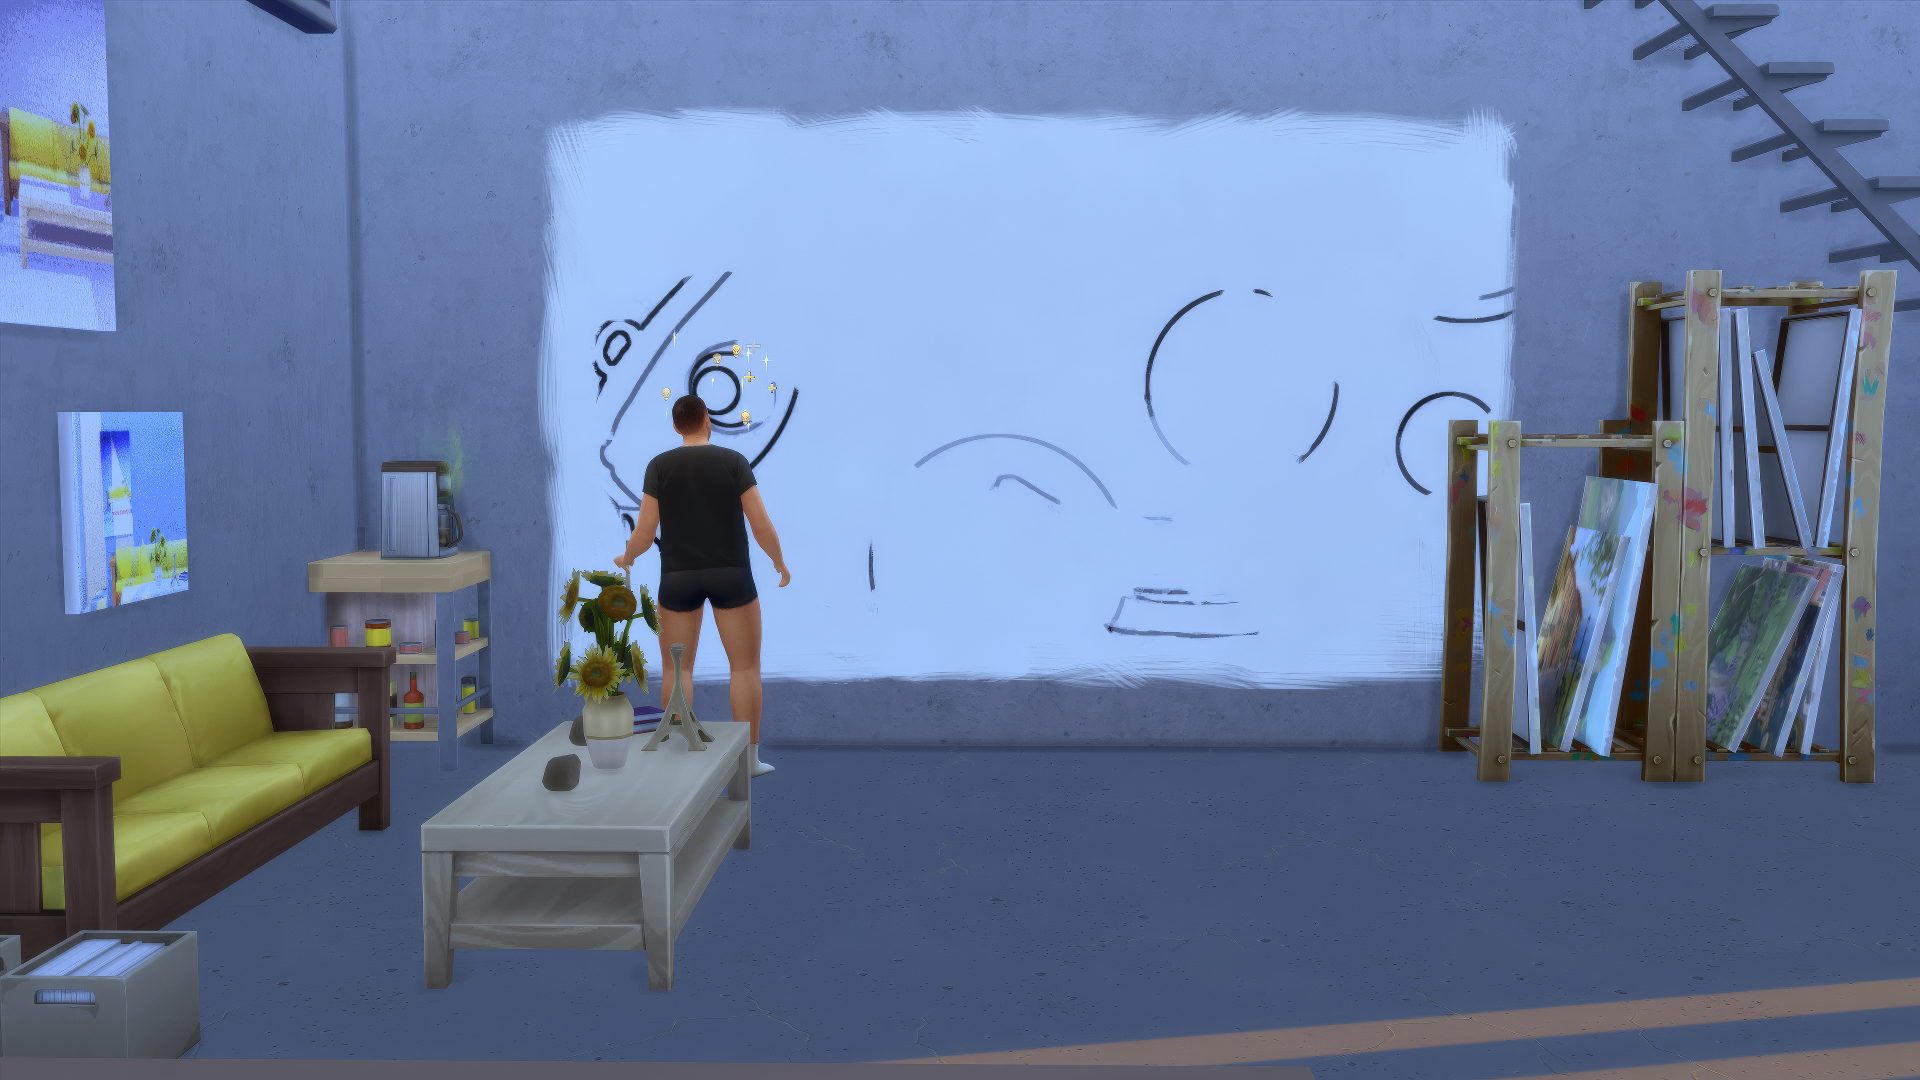  Adonis Archontides,  Adonis and the Labour of Artistic Production,  Performance documentation in  The Sims 4 , screenshots, Instagrams posts, 2017-2018 